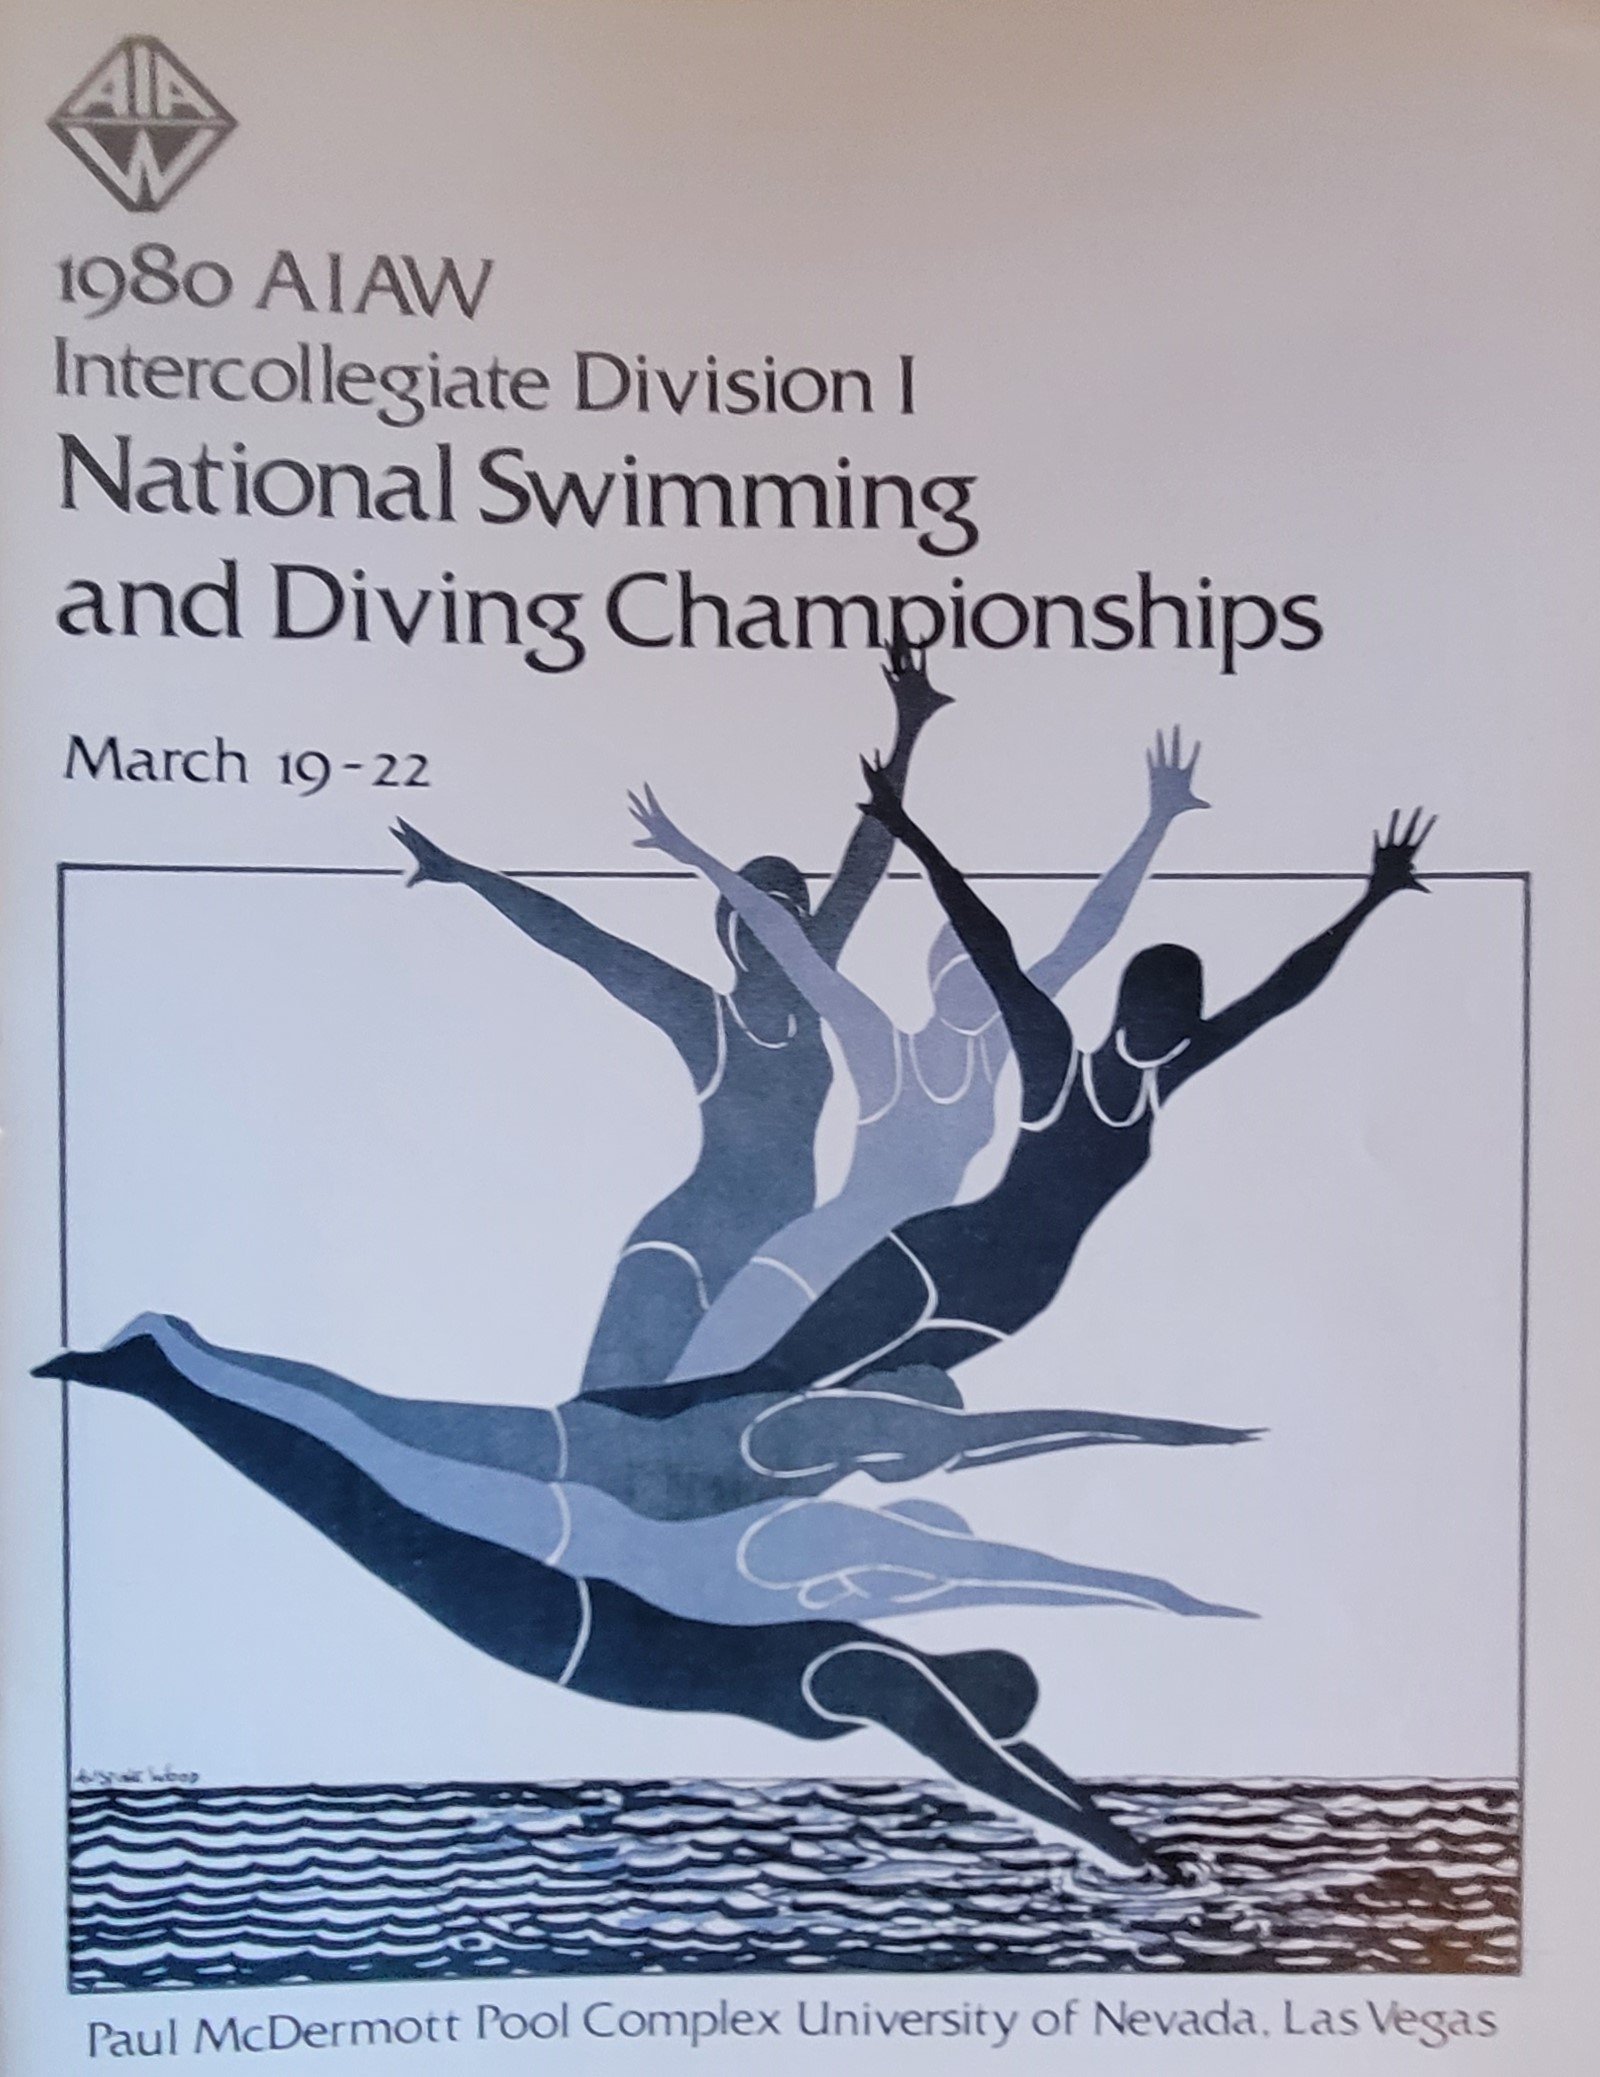  1980 AIAW – March 19-22-     75 colleges representing 500 athletes competed in the &nbsp;AIAW Division I National Swimming and Diving Championship at the University of Nevada.  